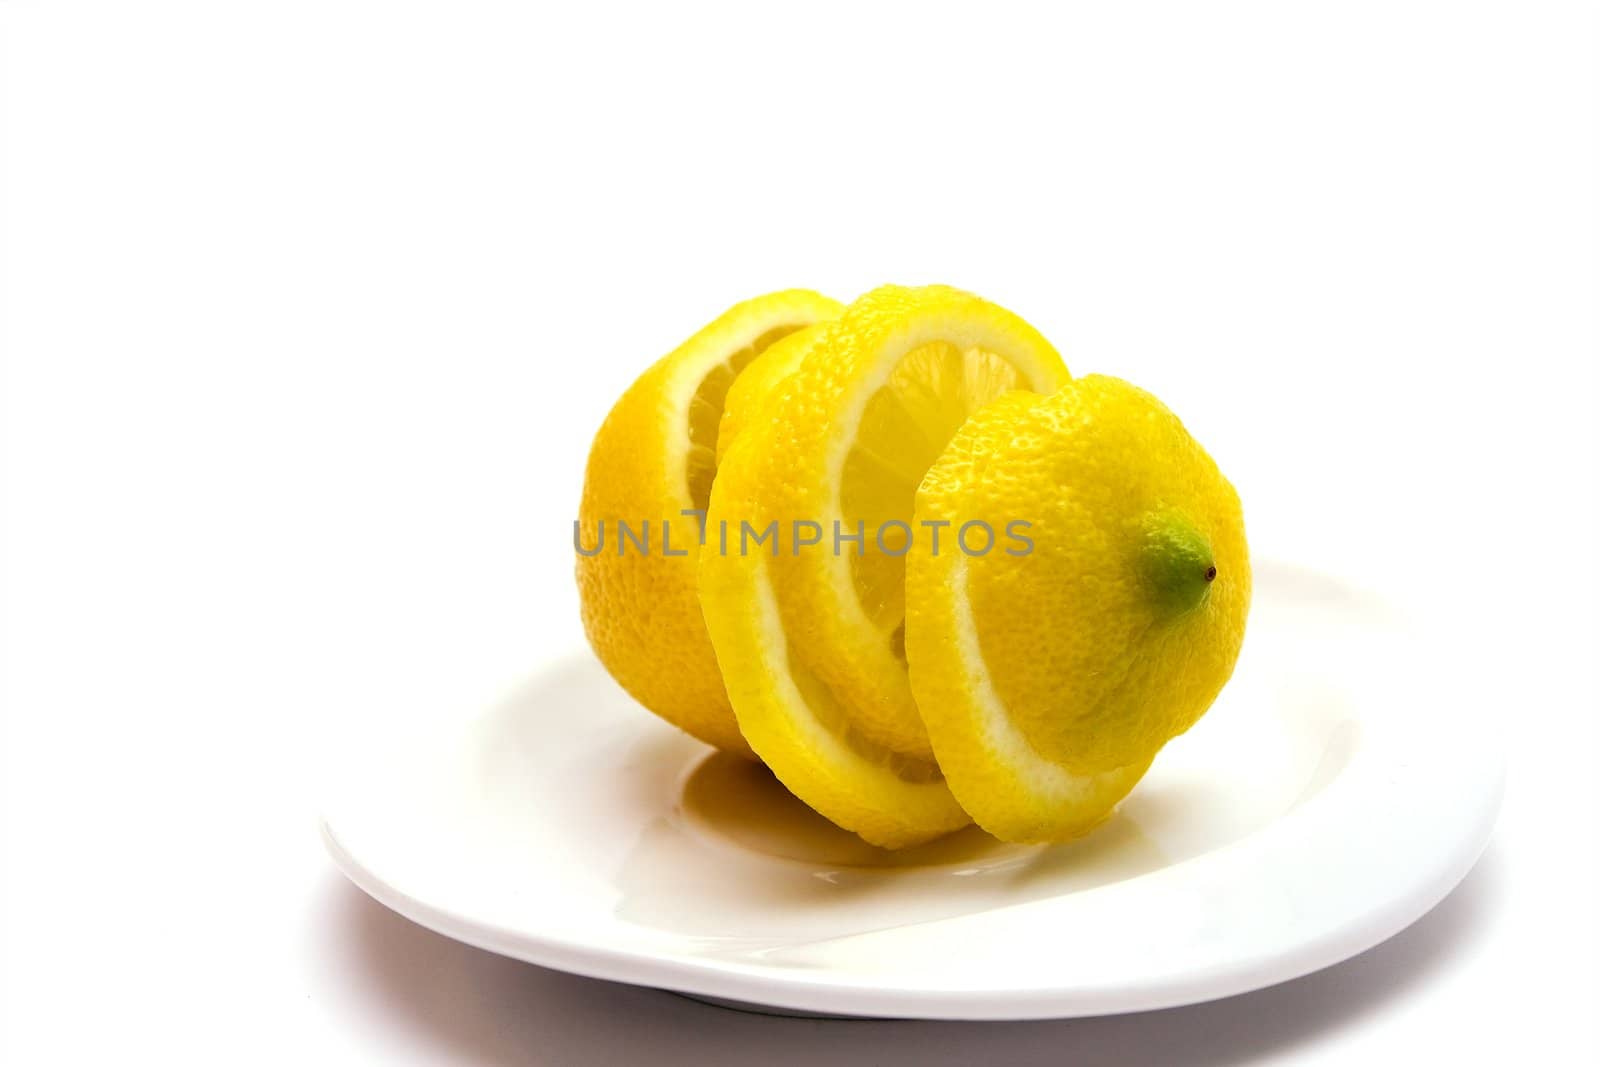 Yellow juicy lemon on a white plate on a white background